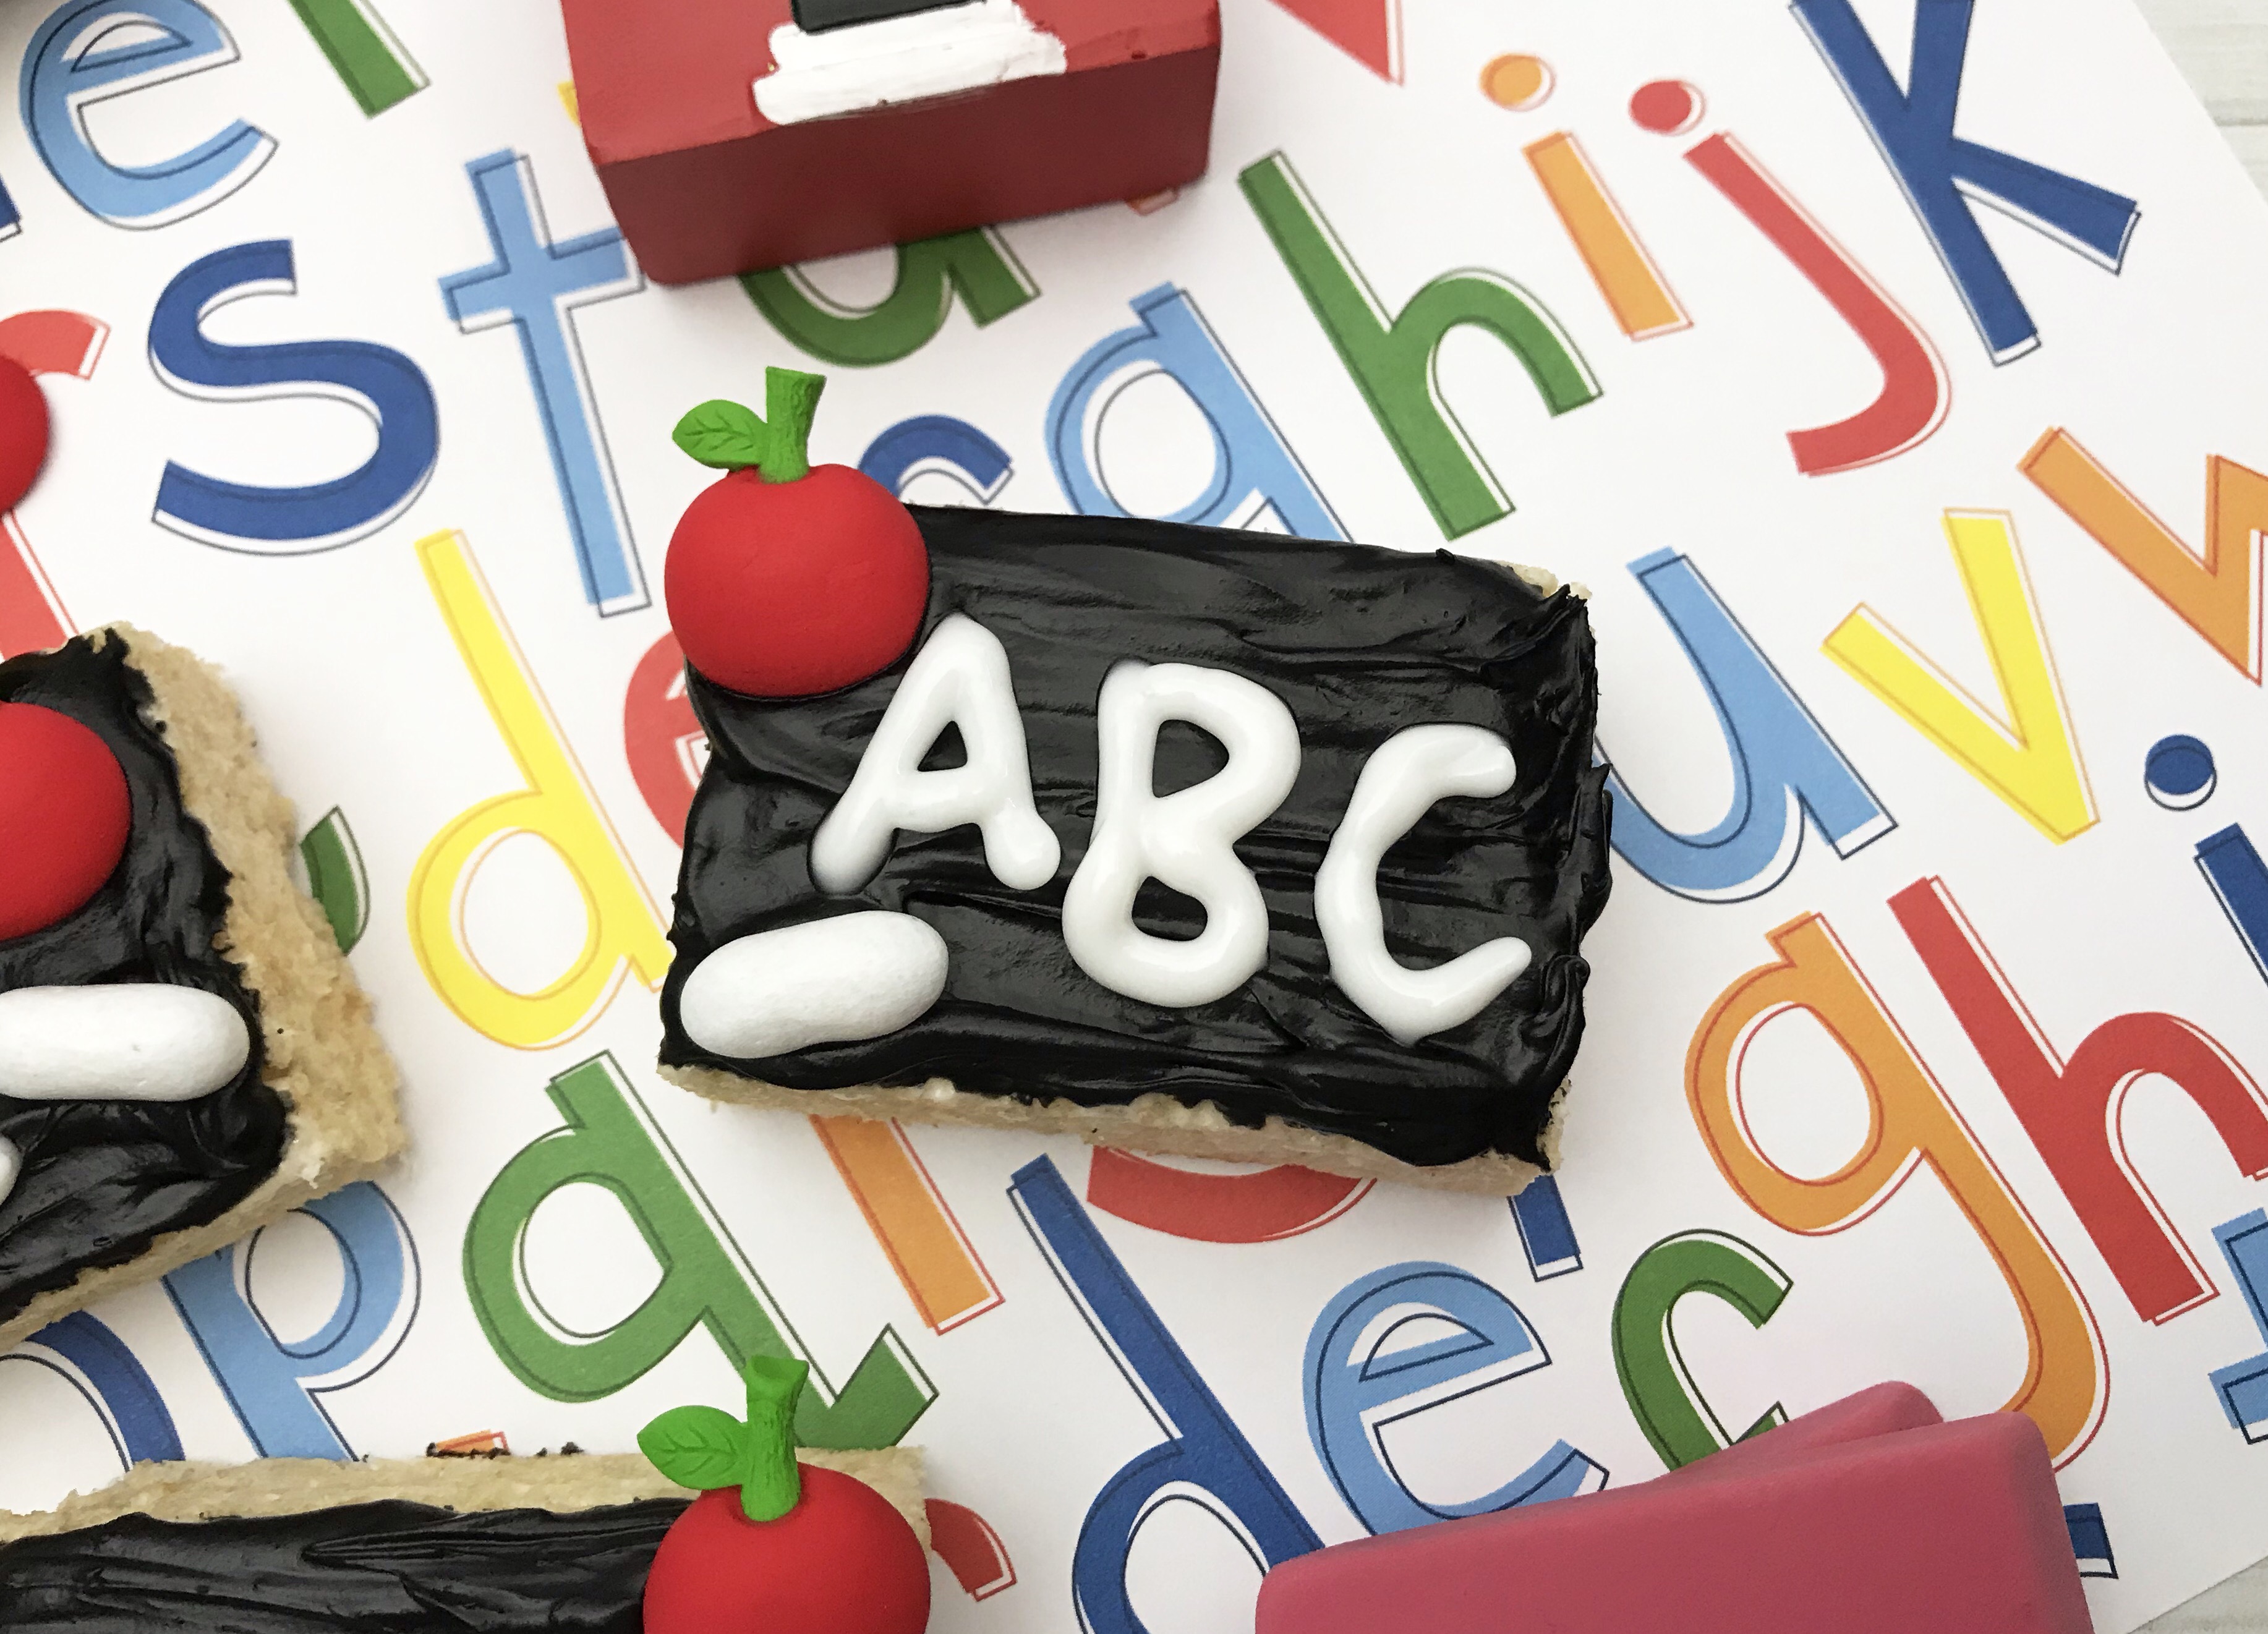 Sharing some amazing back to school traditions for kids and a fun chalkboard rice krispie treat recipe!